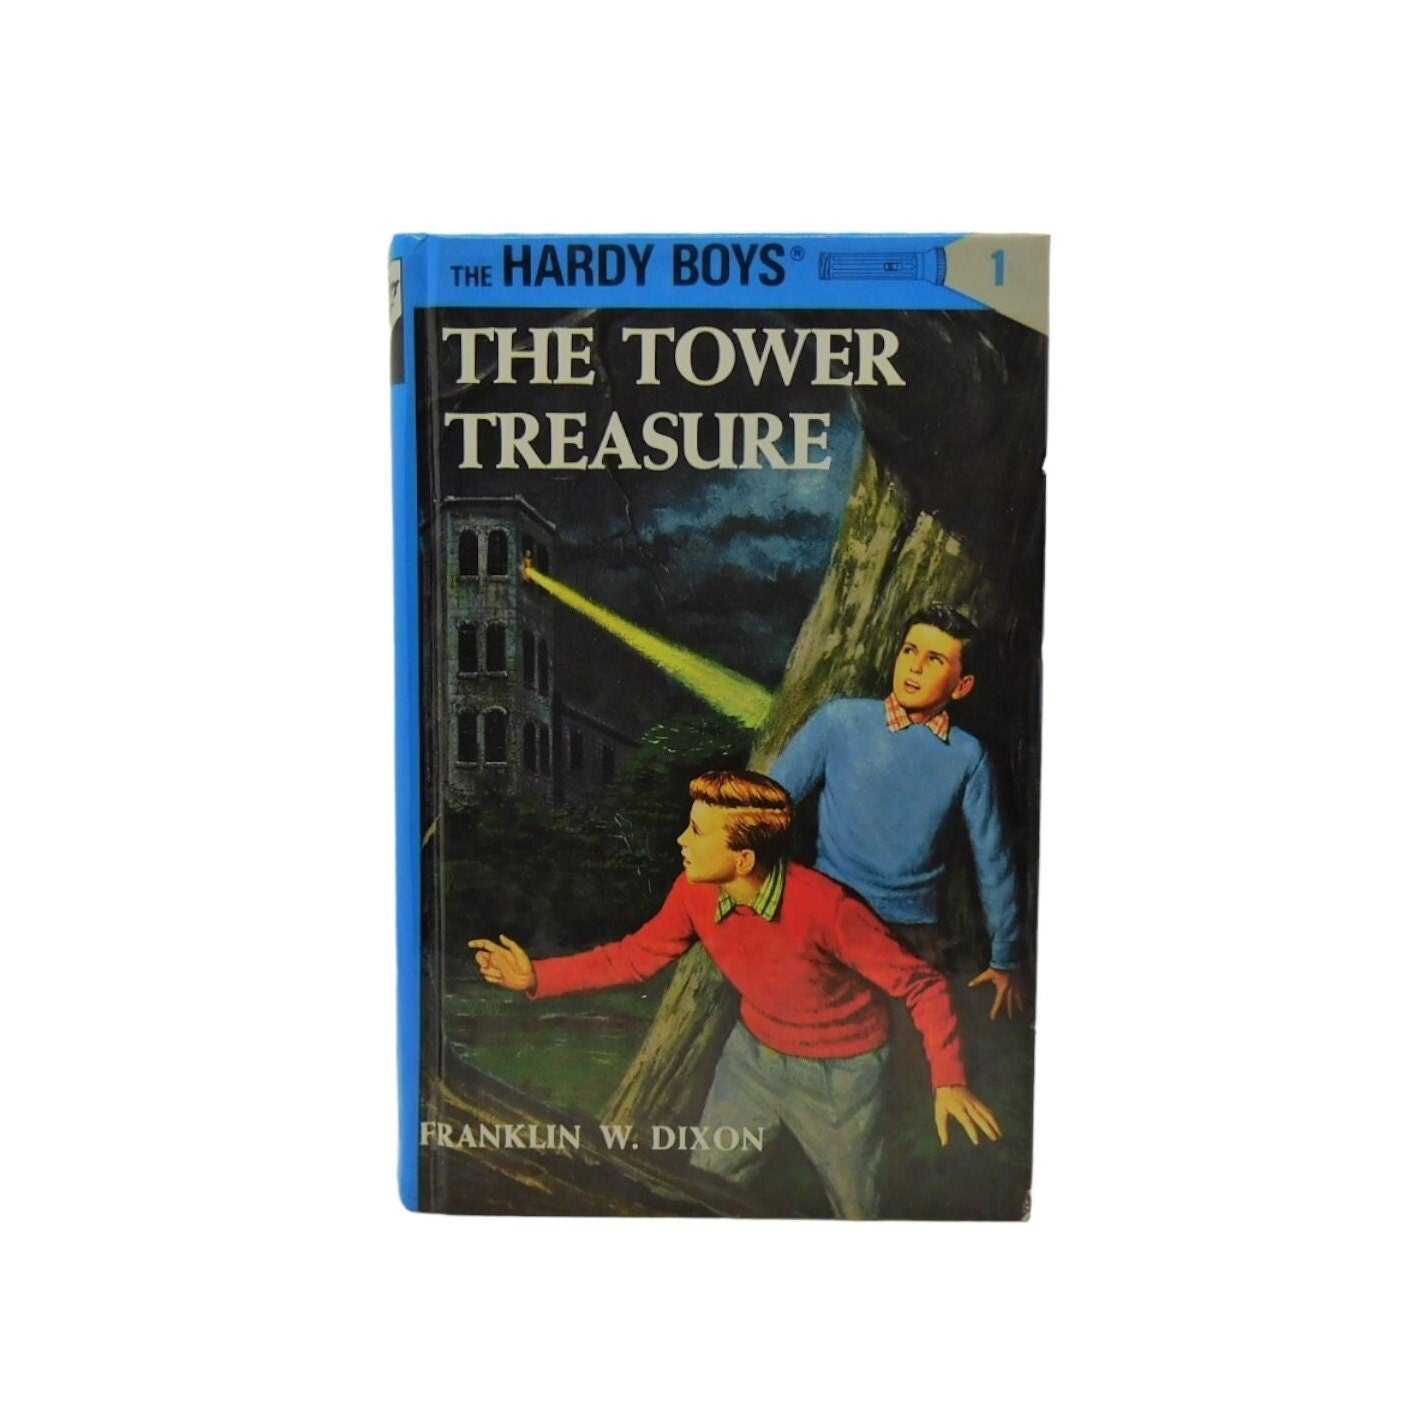 The Hardy Boys #1: The Tower Treasure by Franklin W. Dixon 1997